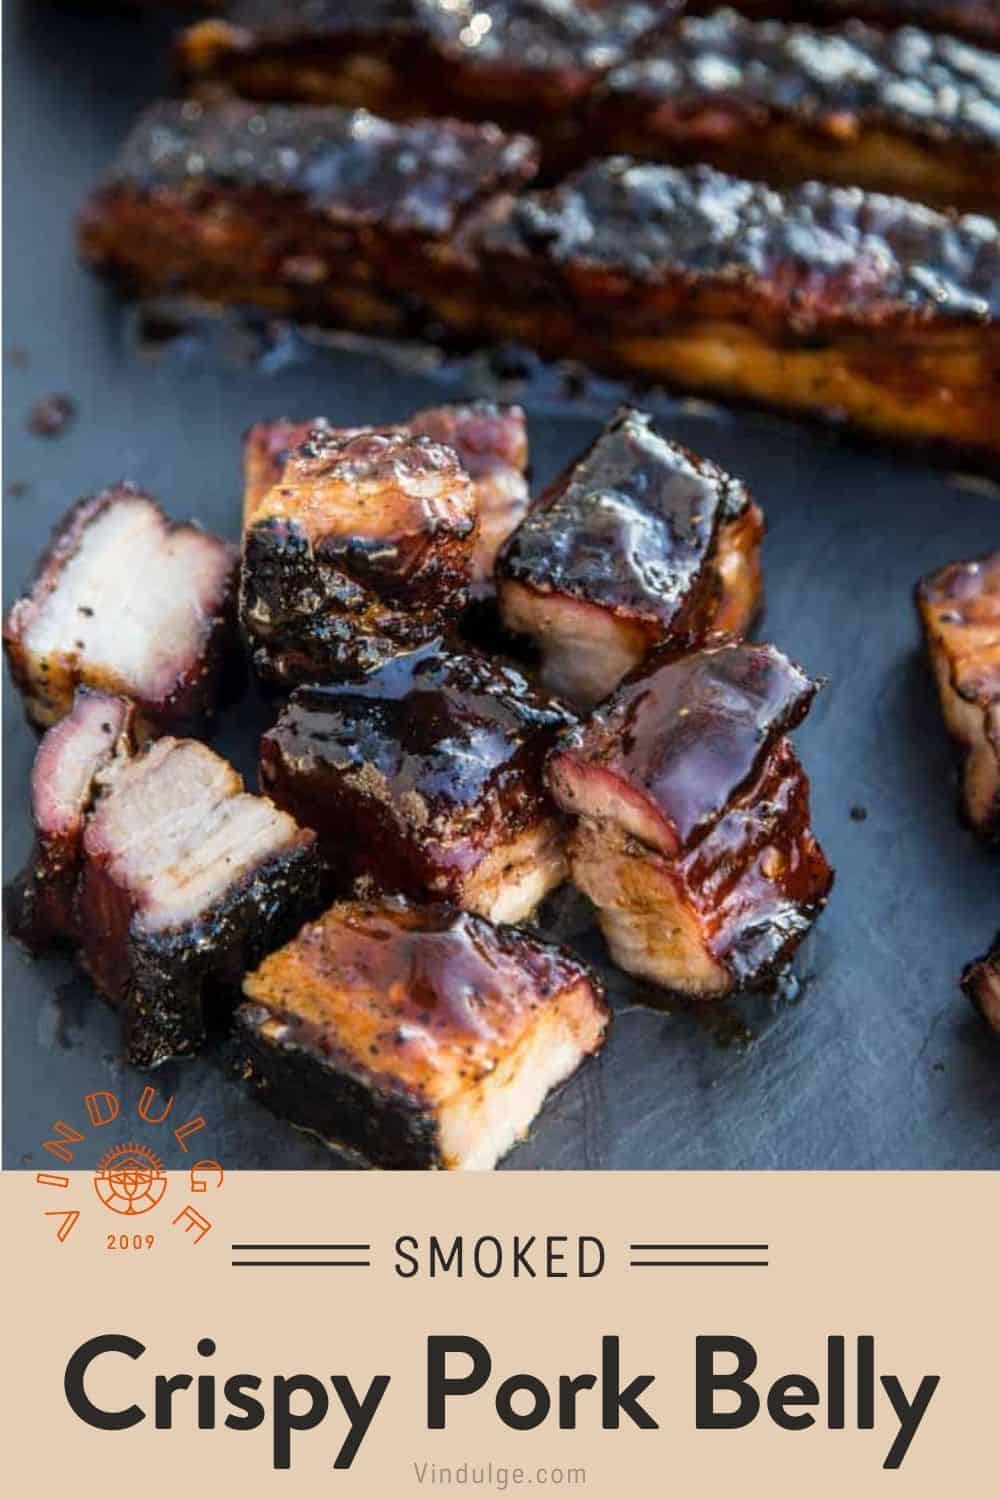 Crispy Pork Belly that was smoked and grilled